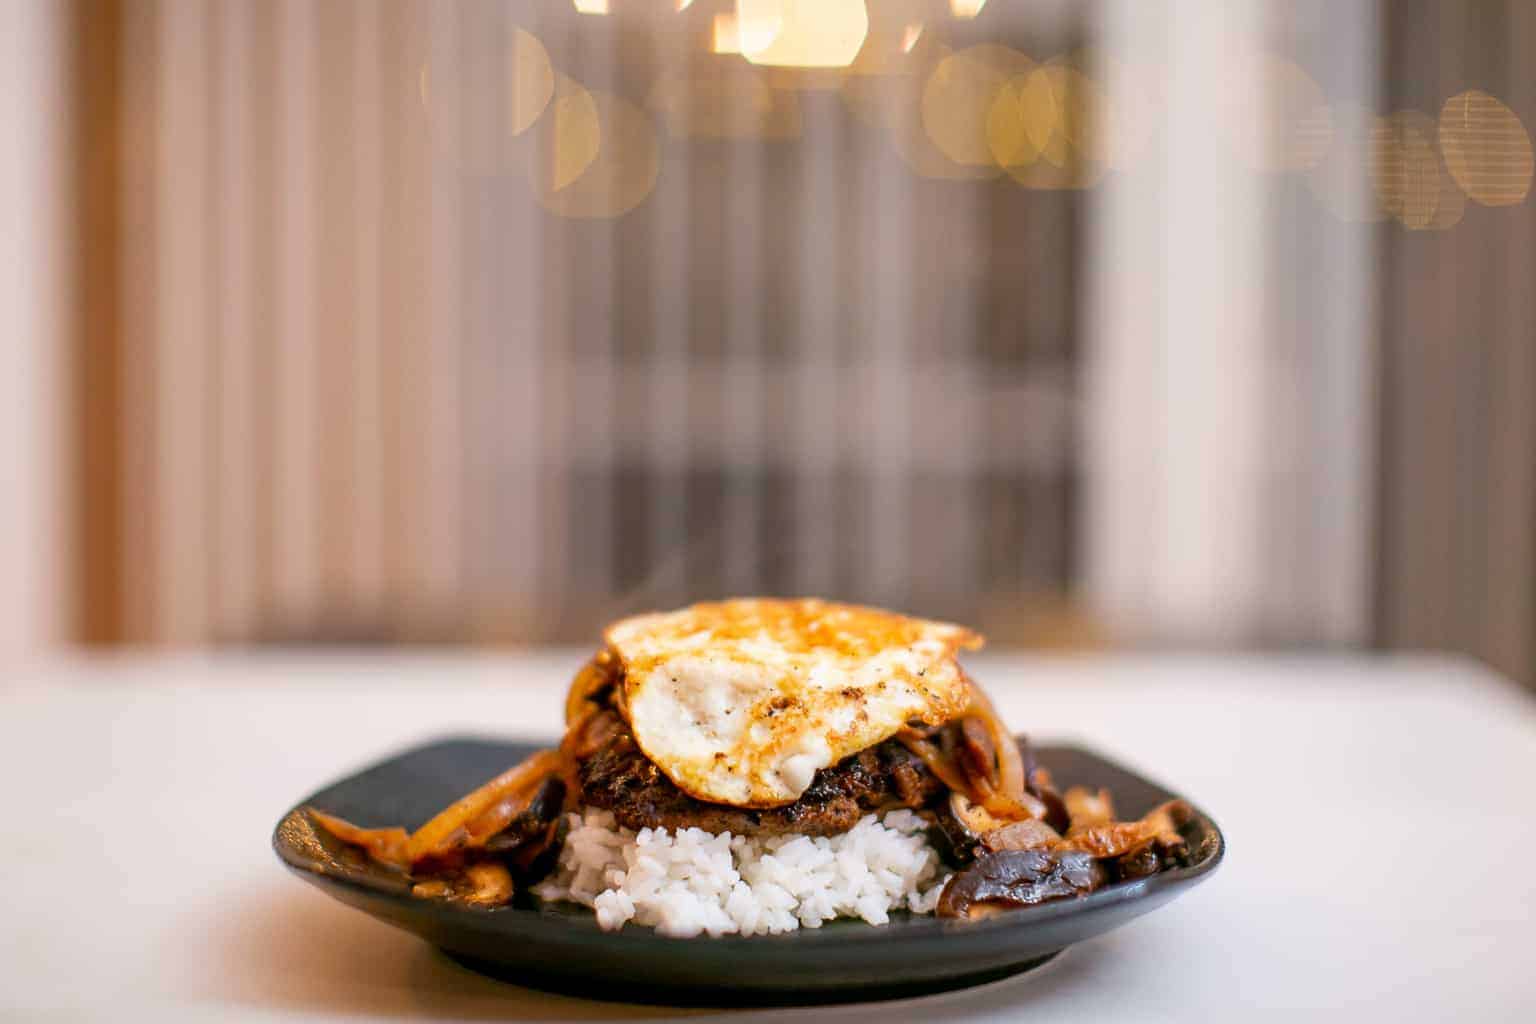 Chopped steak served with rice and egg